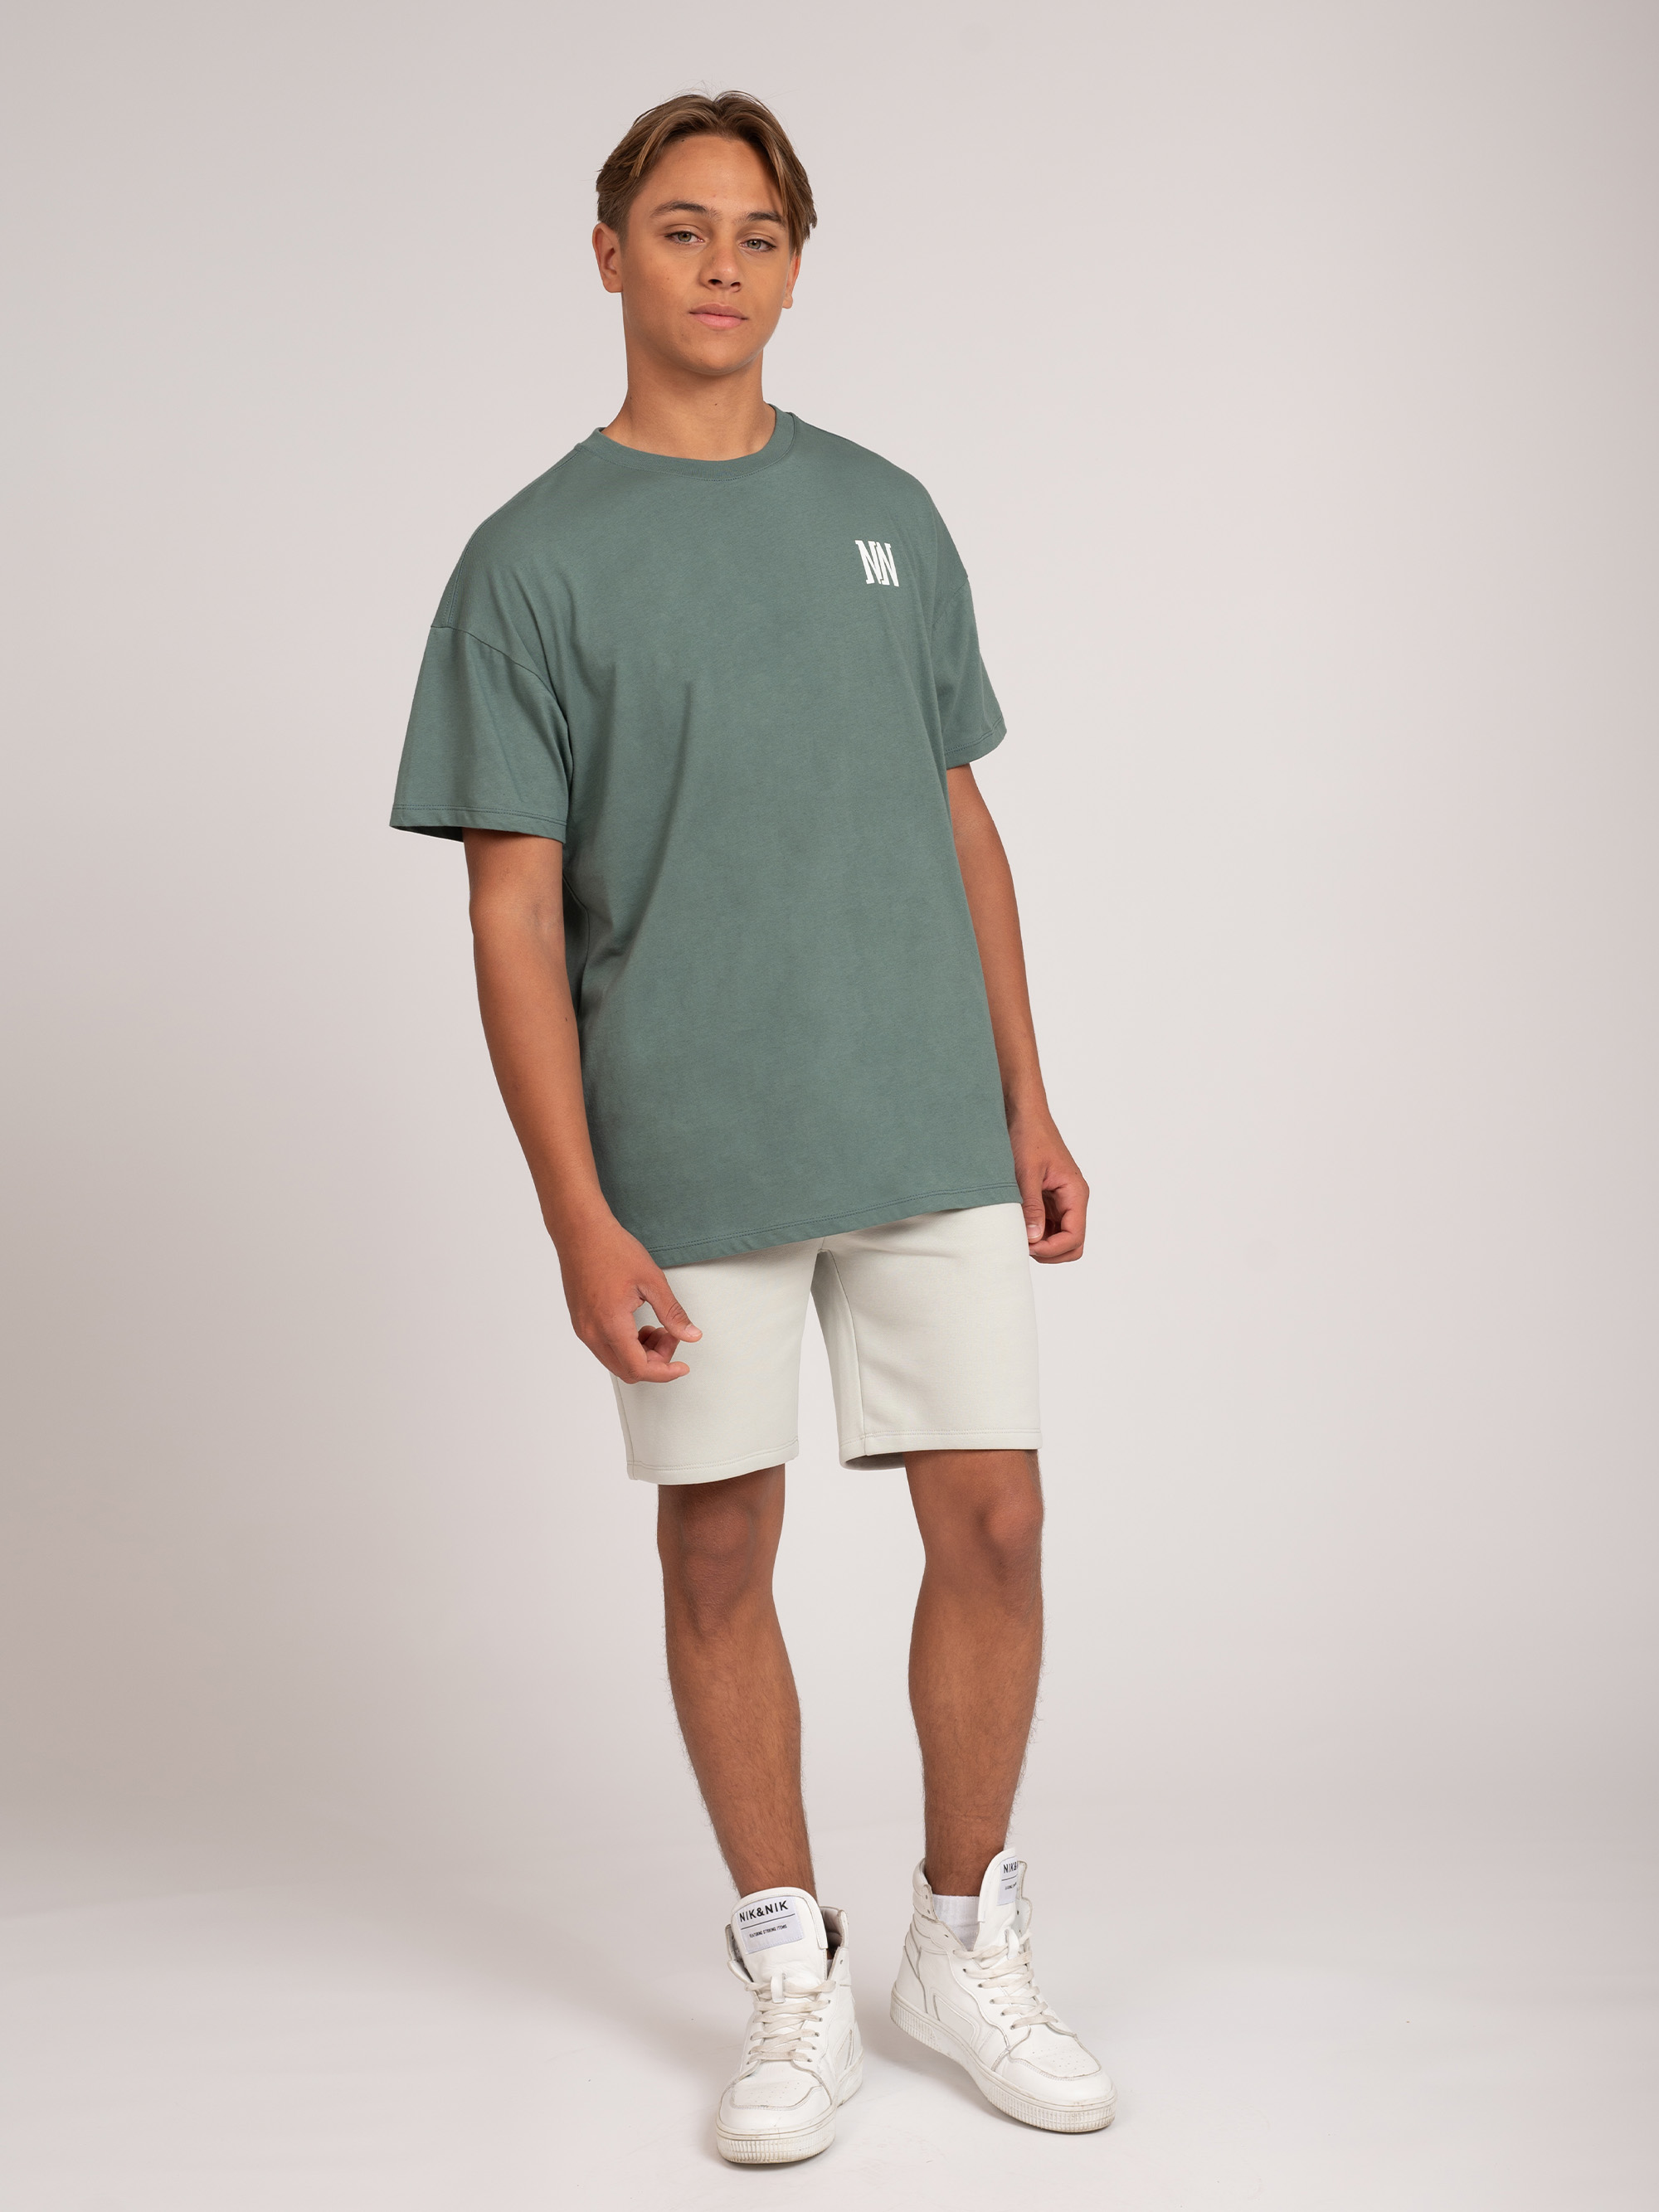 Sweat short with cord